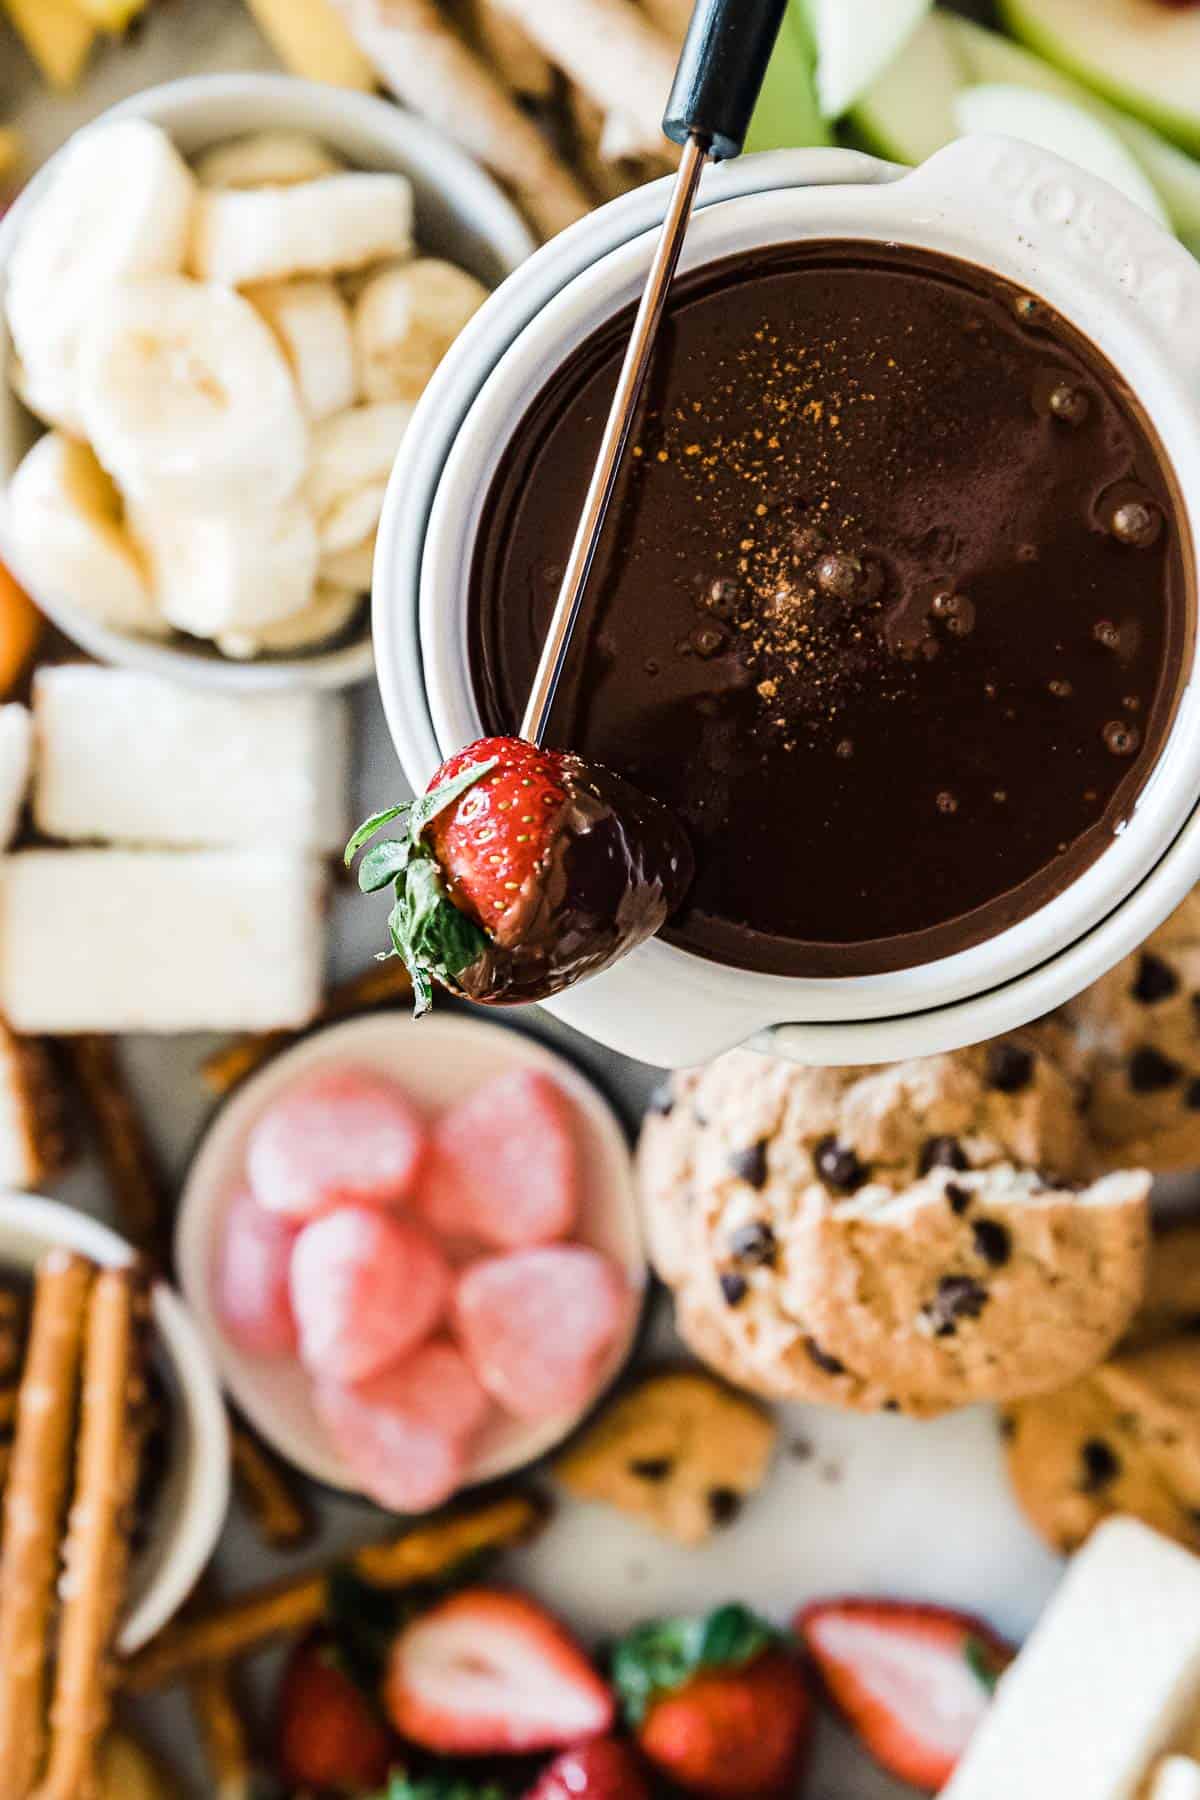 A close up of chocolate fondue with a strawberry partially dipped in chocolate set ontop.